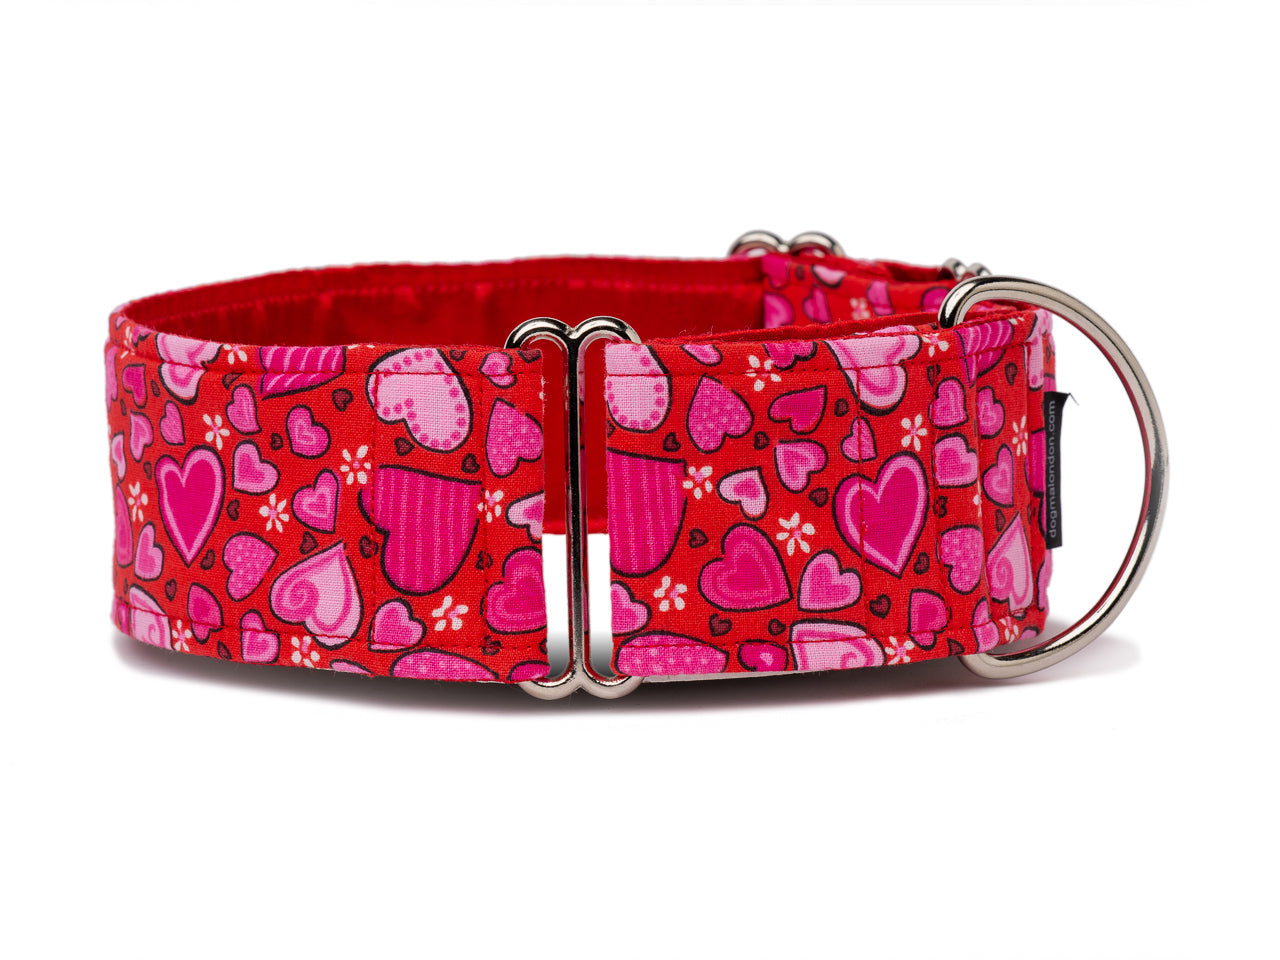 Show your pooch some love with a shower of pretty pink hearts. Perfect for Valentine's Day or any day you want to say "I love you!"